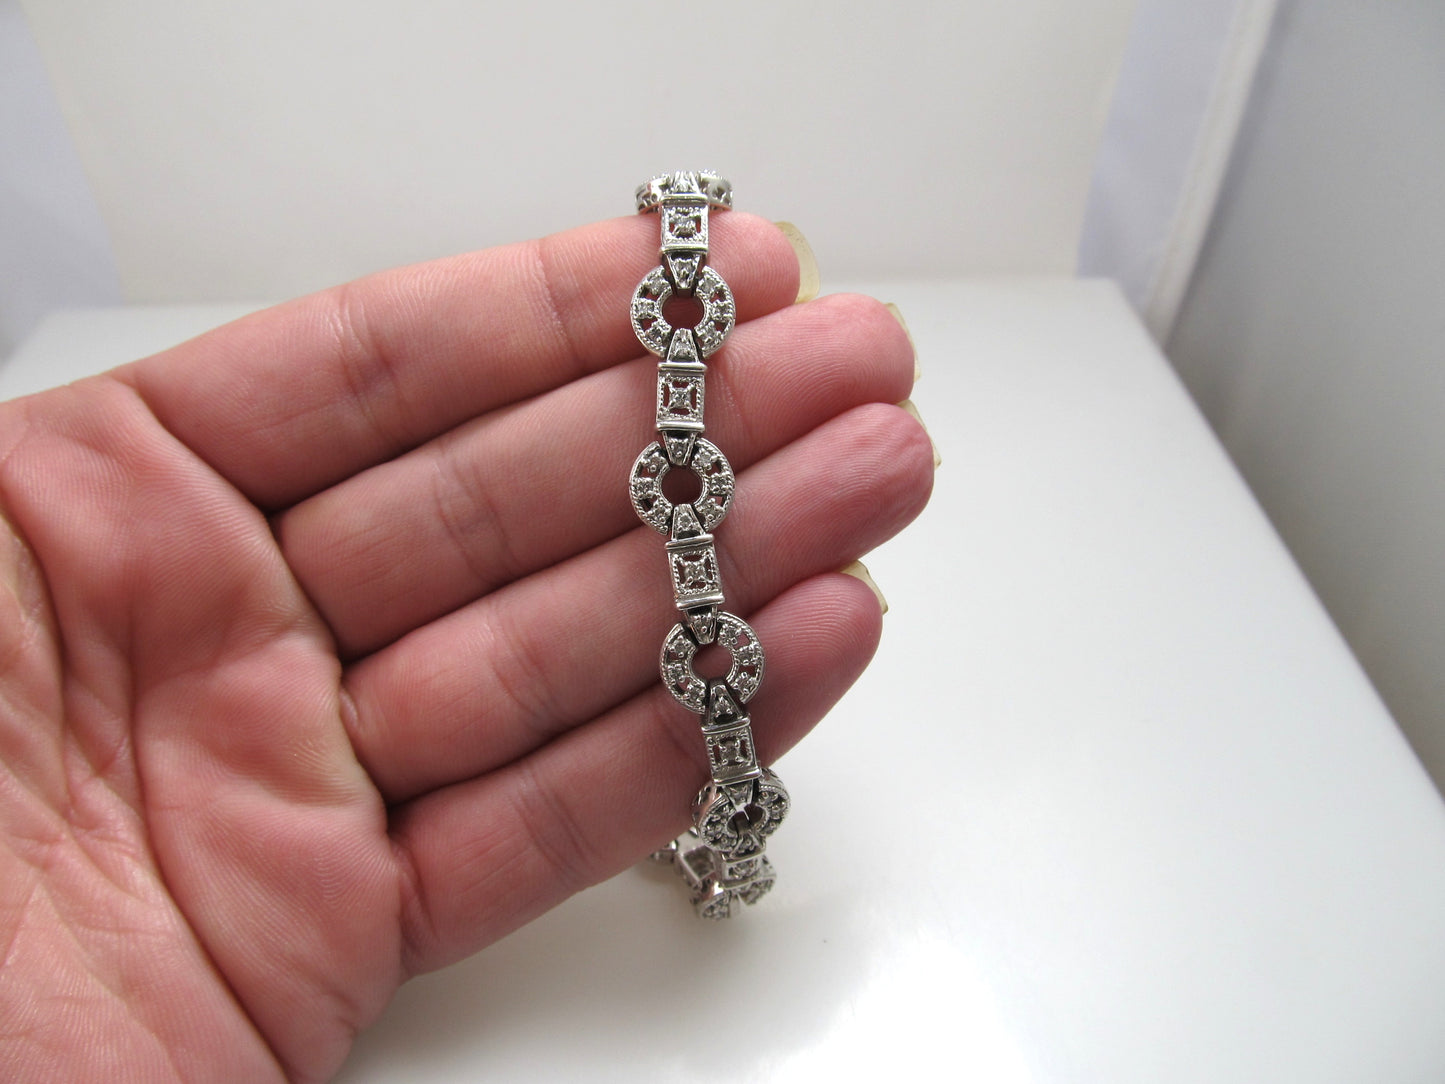 14k White Gold Bracelet With 1.10cts In Diamonds